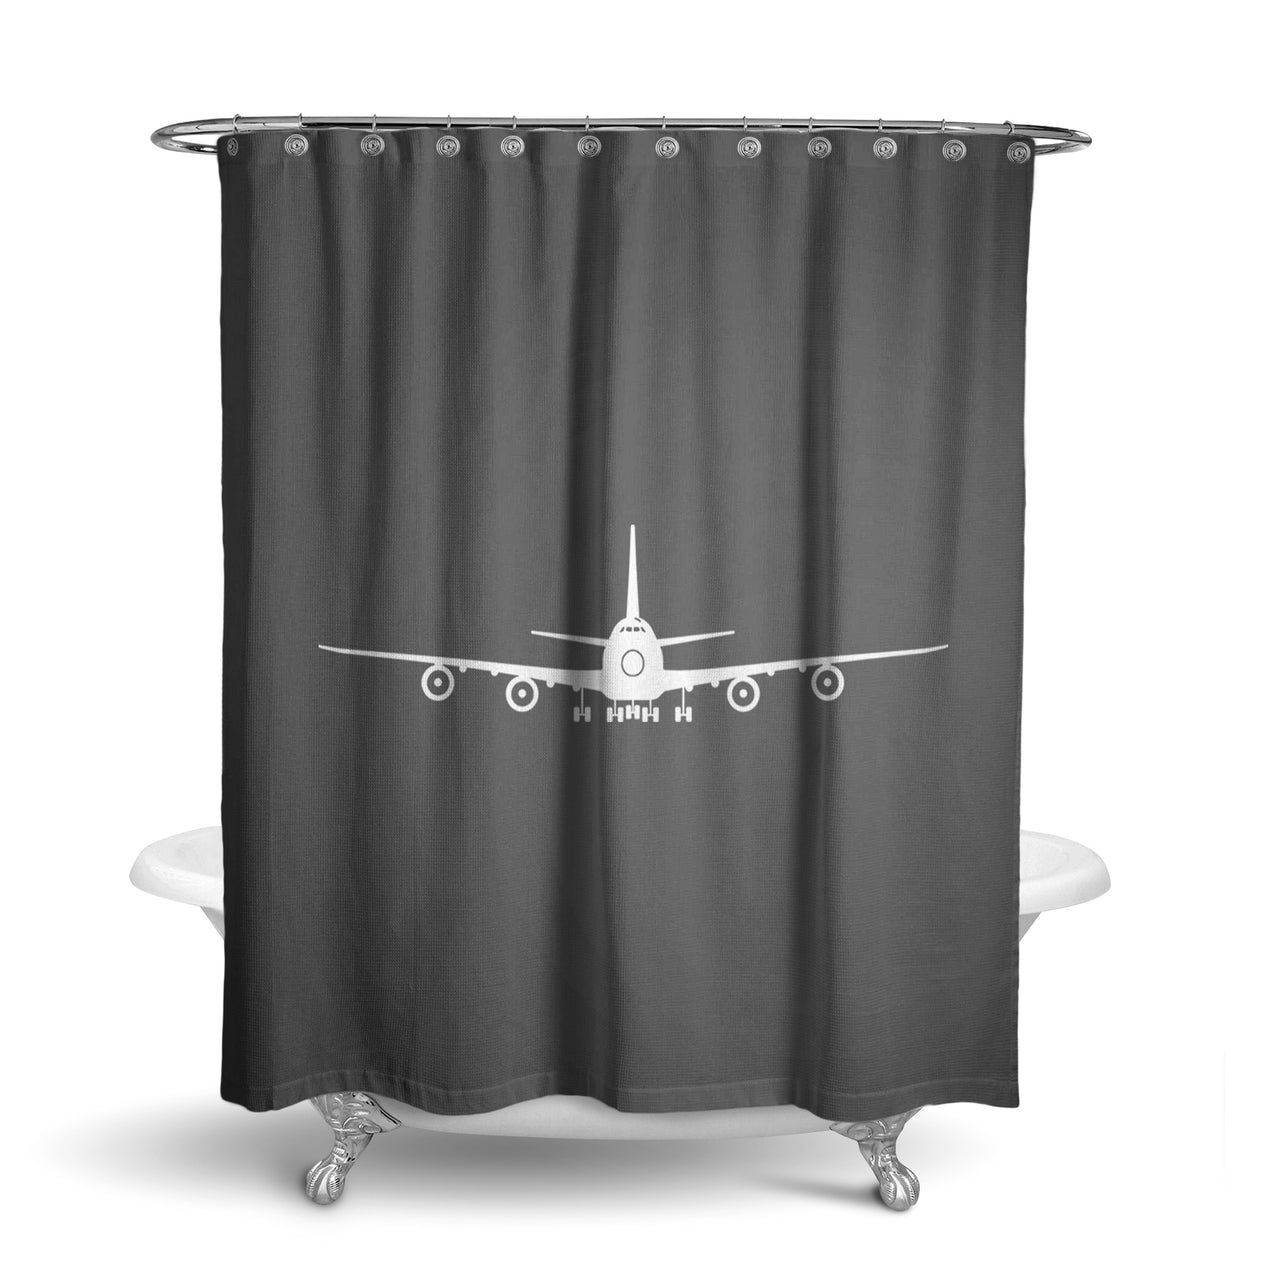 Boeing 747 Silhouette Designed Shower Curtains